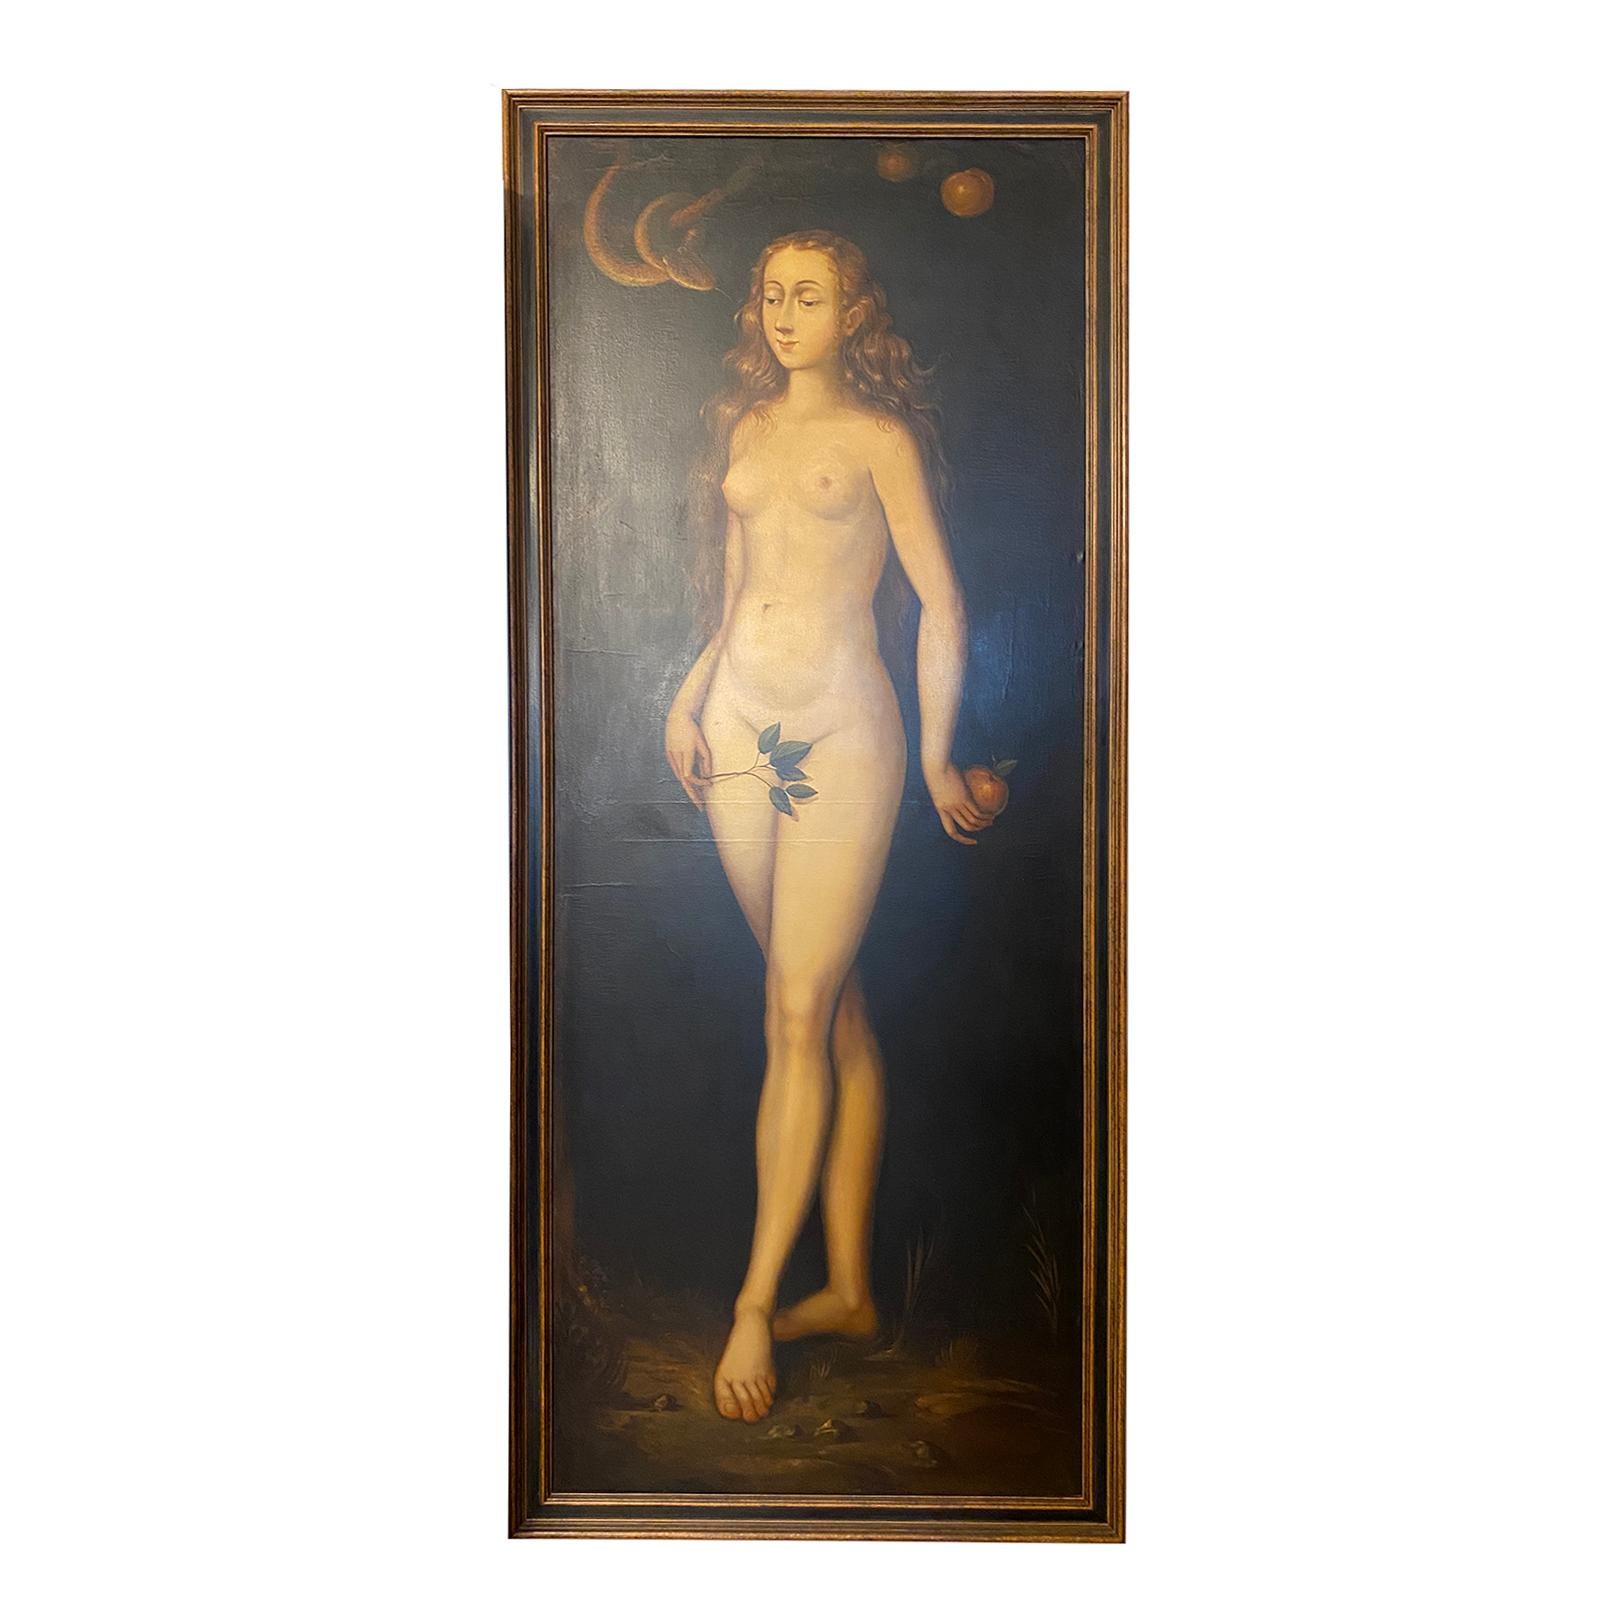 A pair of circa 1940's Dutch paintings on canvas.

Measurements:
Height: 74.5